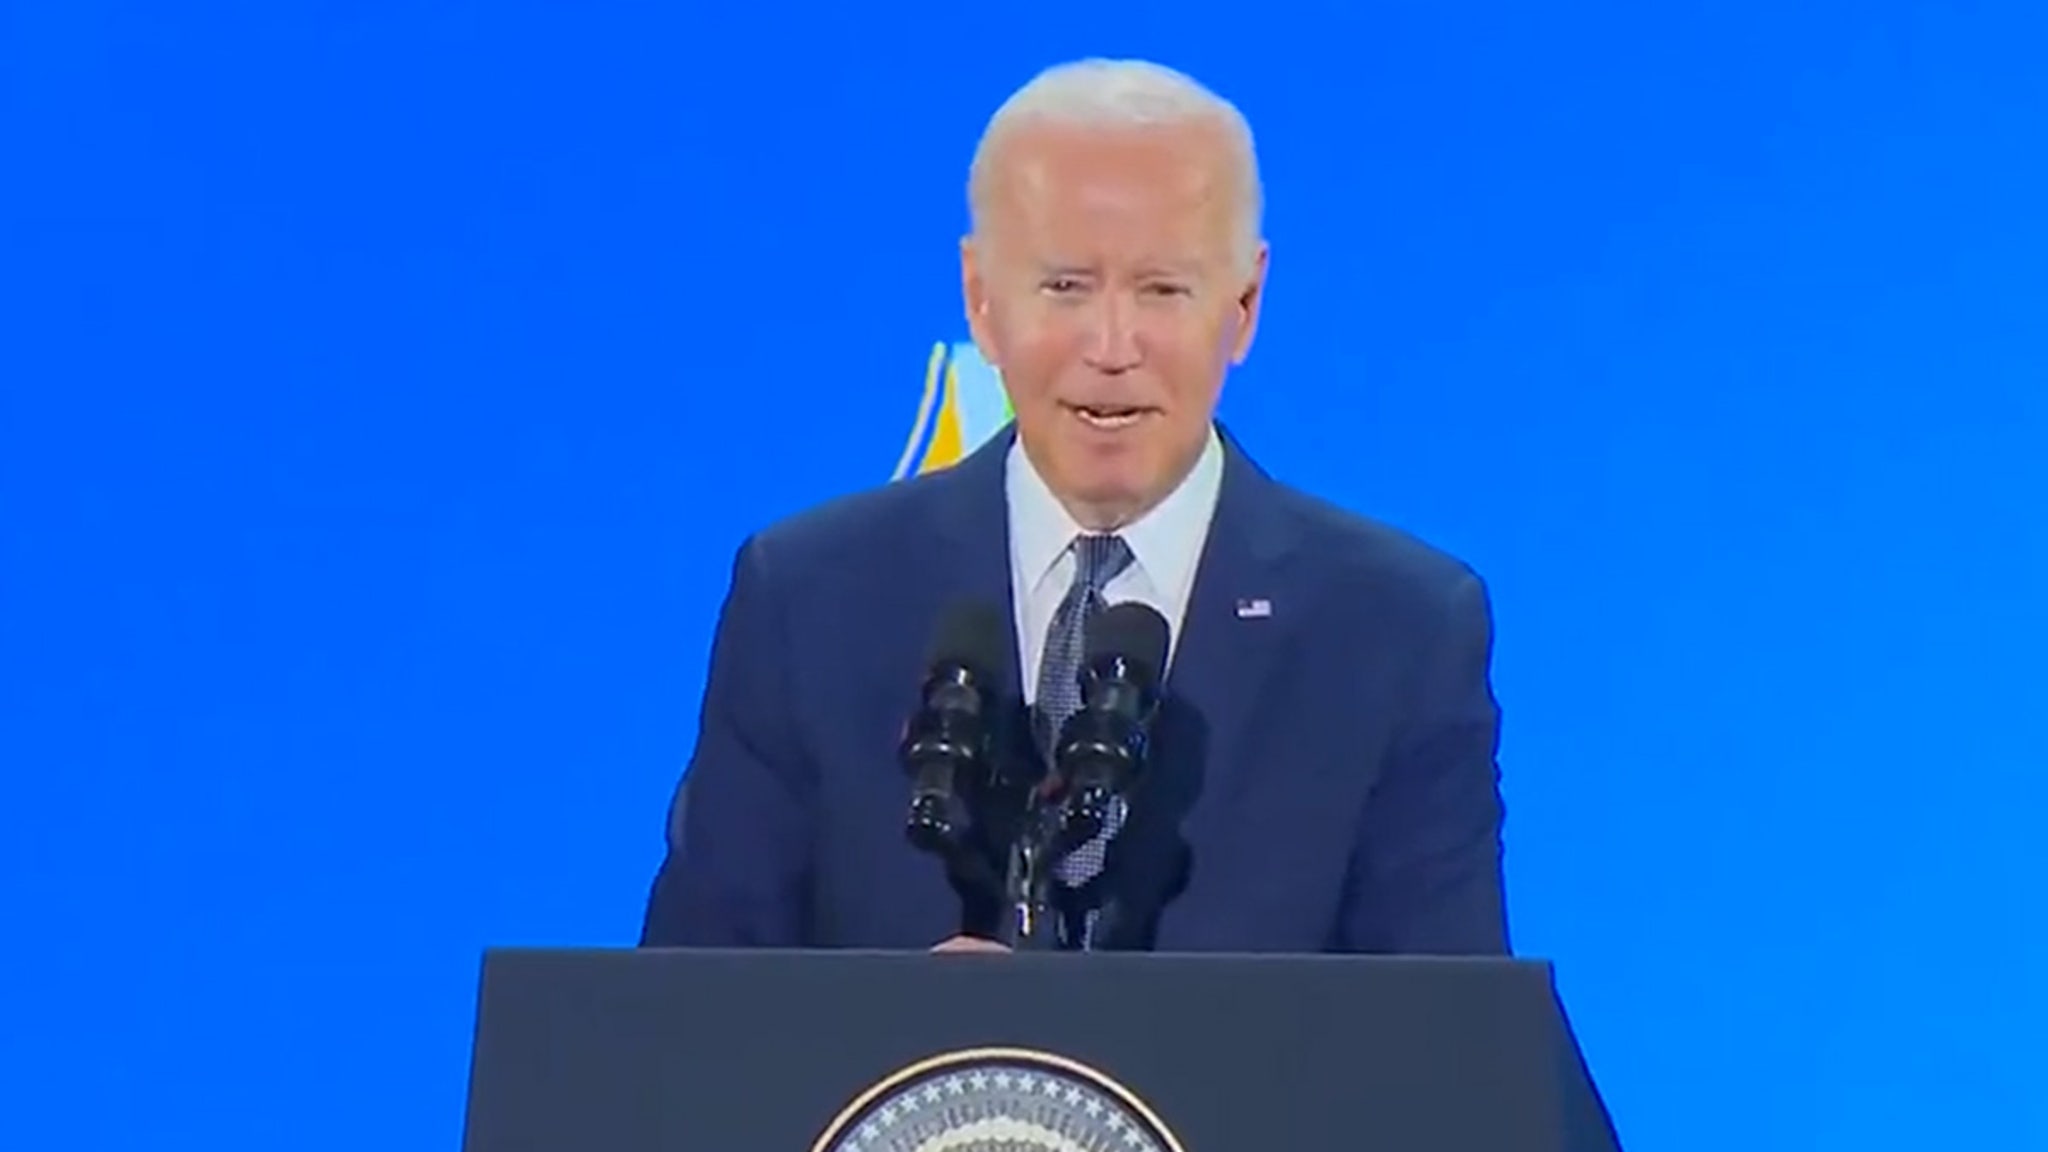 President Biden Says Gavin Newsom Could ‘Have the Job I’m Looking For’